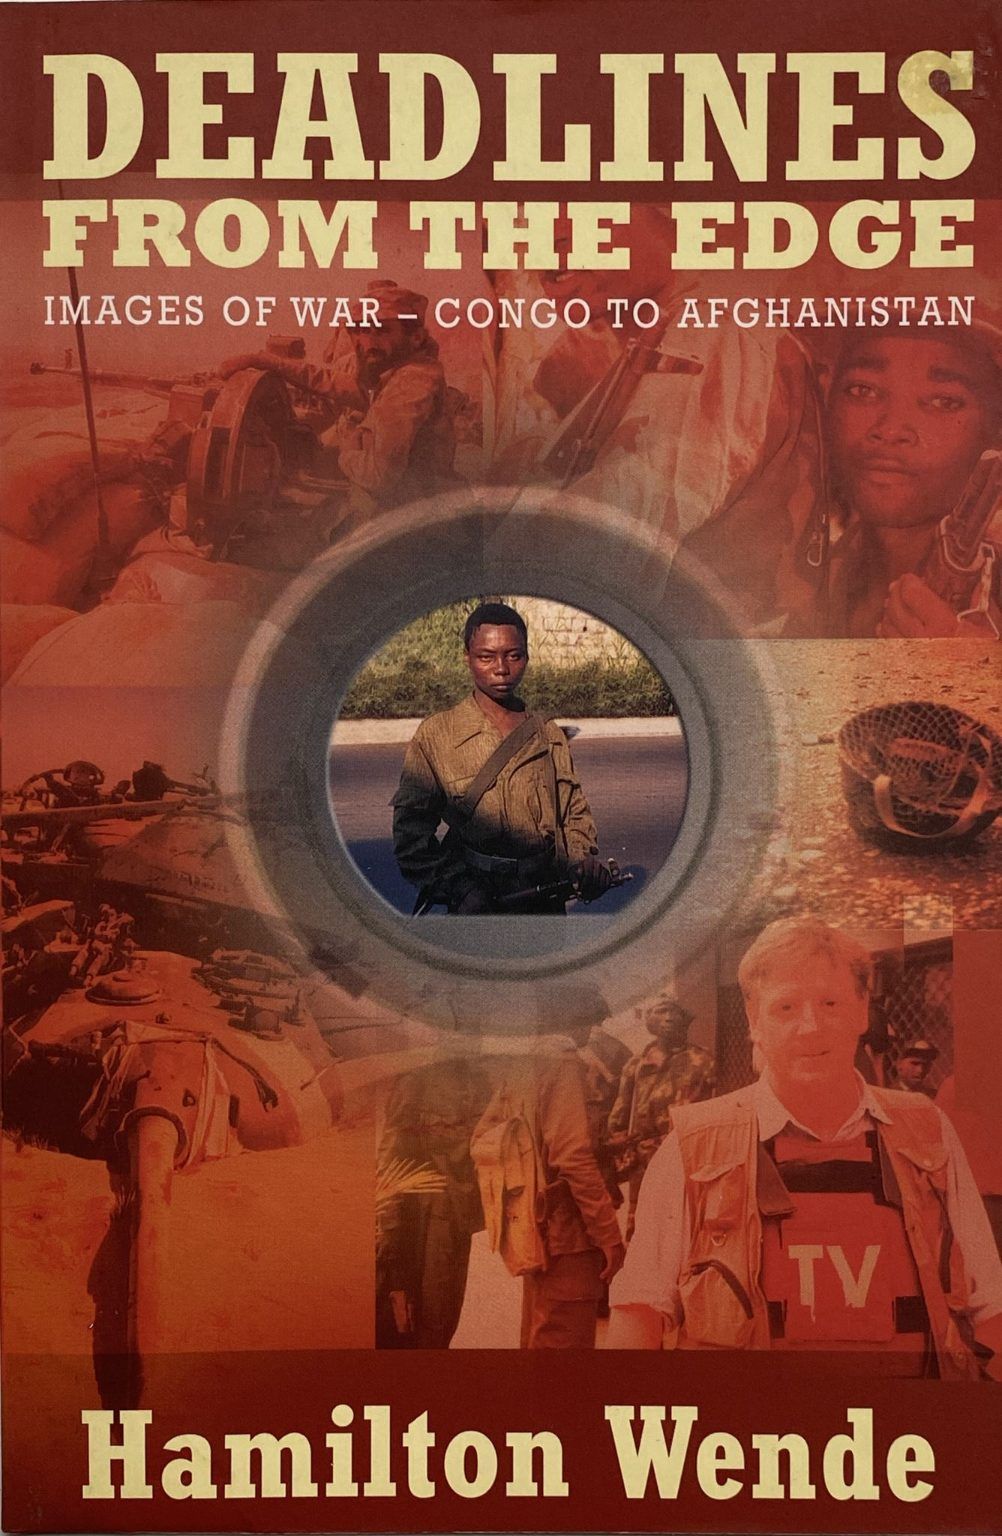 DEADLINES FROM THE EDGE: Images of War - Congo to Afghanistan